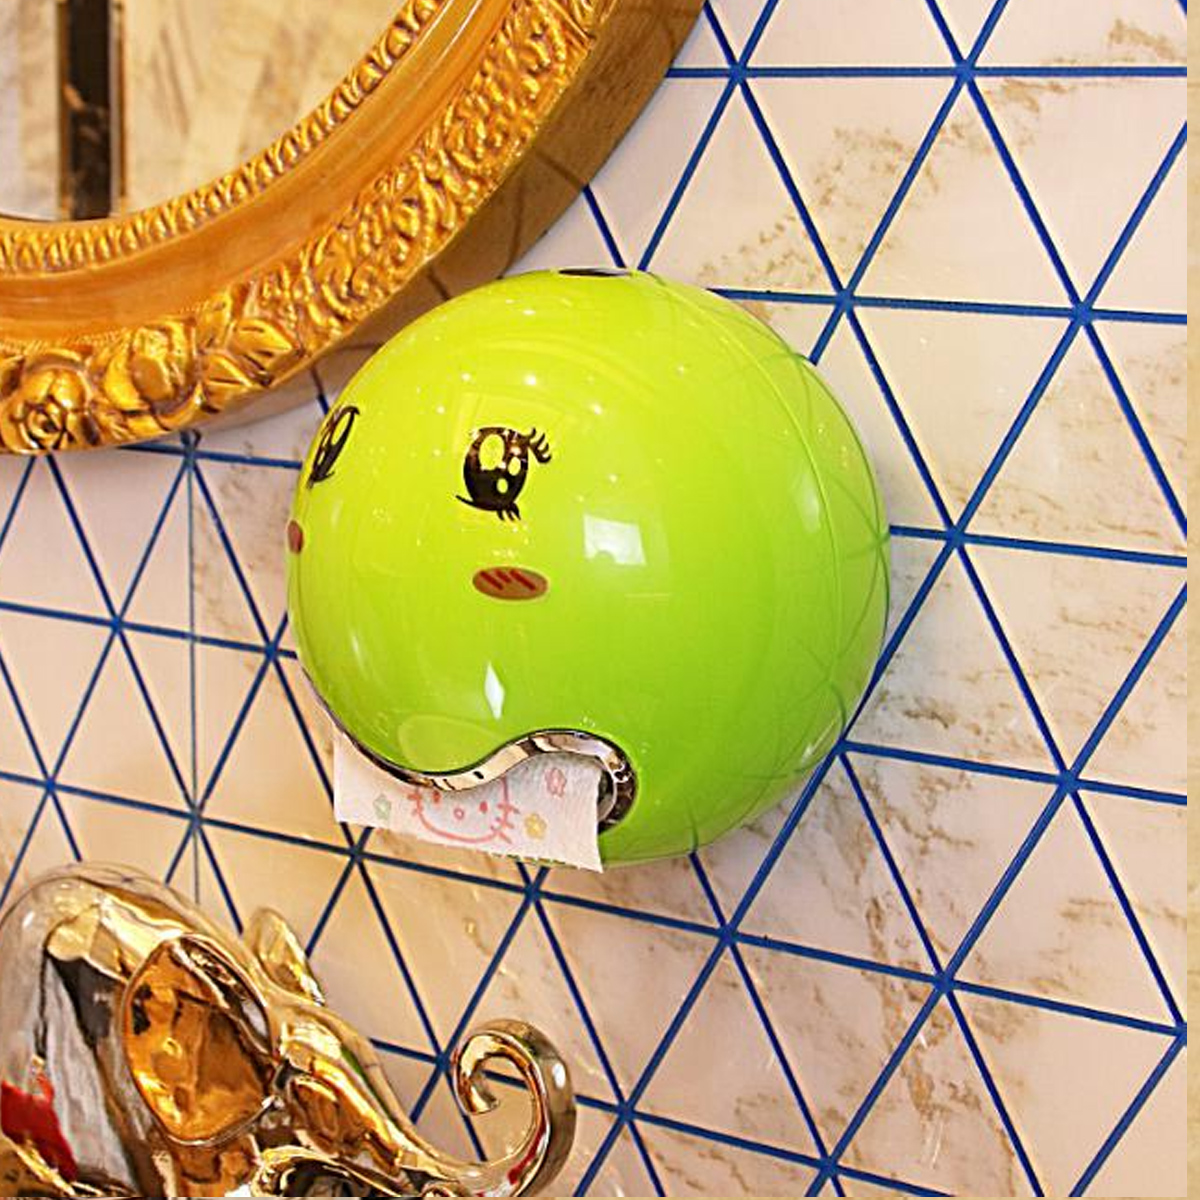 Bathroom-Ball-Shaped-Face-Wall-Mounted-Tissue-Holder-Toilet-Roll-Paper-Box-Paper-Shelf-Holder-1634911-3